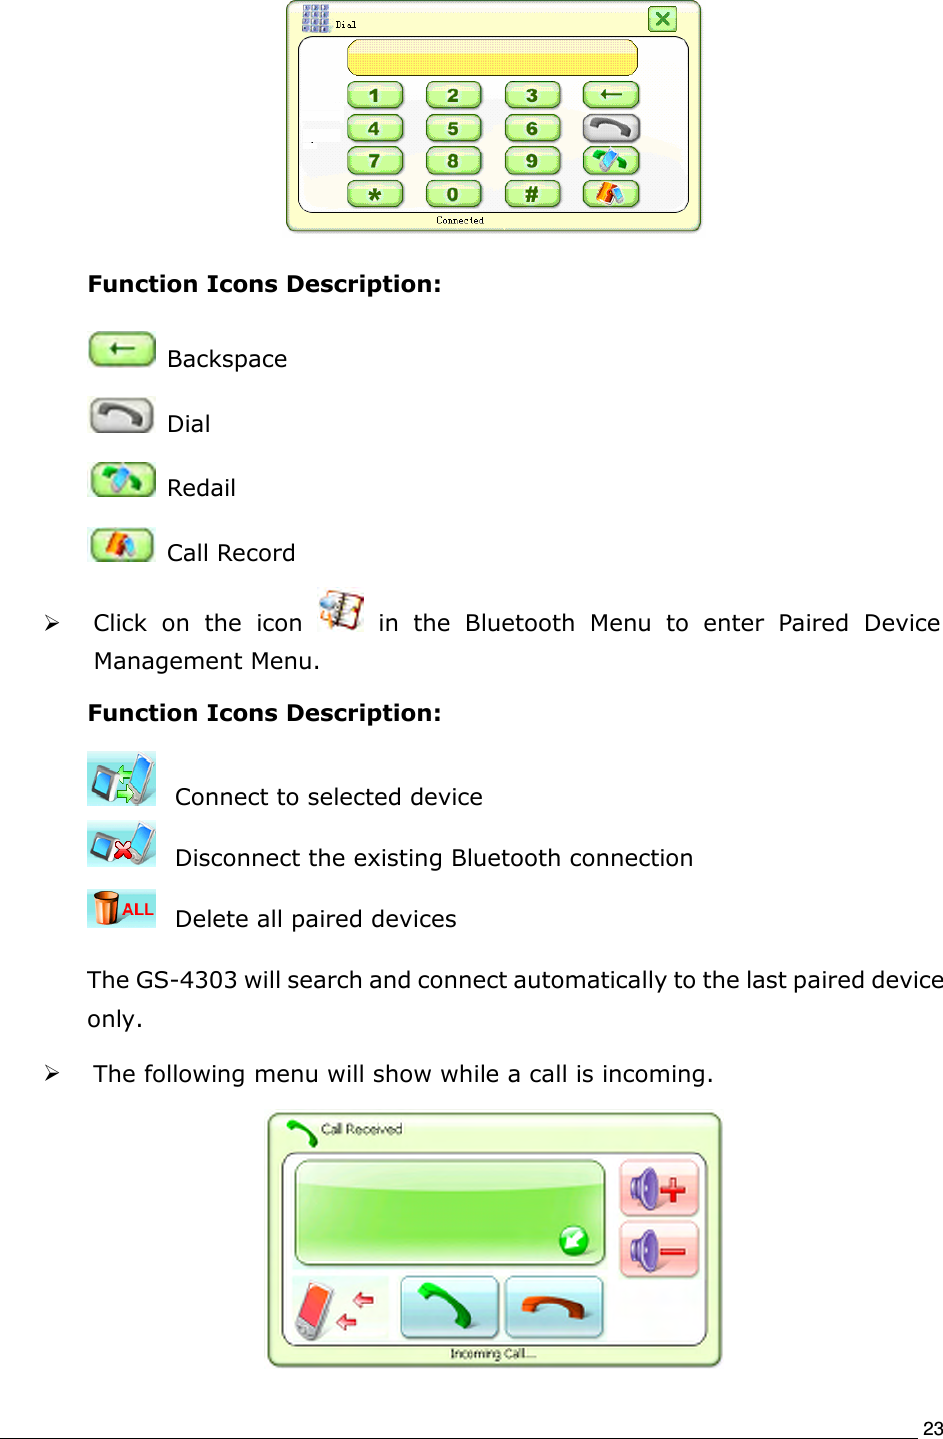                                                                             23  Function Icons Description:   Backspace     Dial     Redail     Call Record  Click  on  the  icon    in  the  Bluetooth  Menu  to  enter  Paired  Device Management Menu.   Function Icons Description:   Connect to selected device   Disconnect the existing Bluetooth connection       Delete all paired devices     The GS-4303 will search and connect automatically to the last paired device only.    The following menu will show while a call is incoming.  